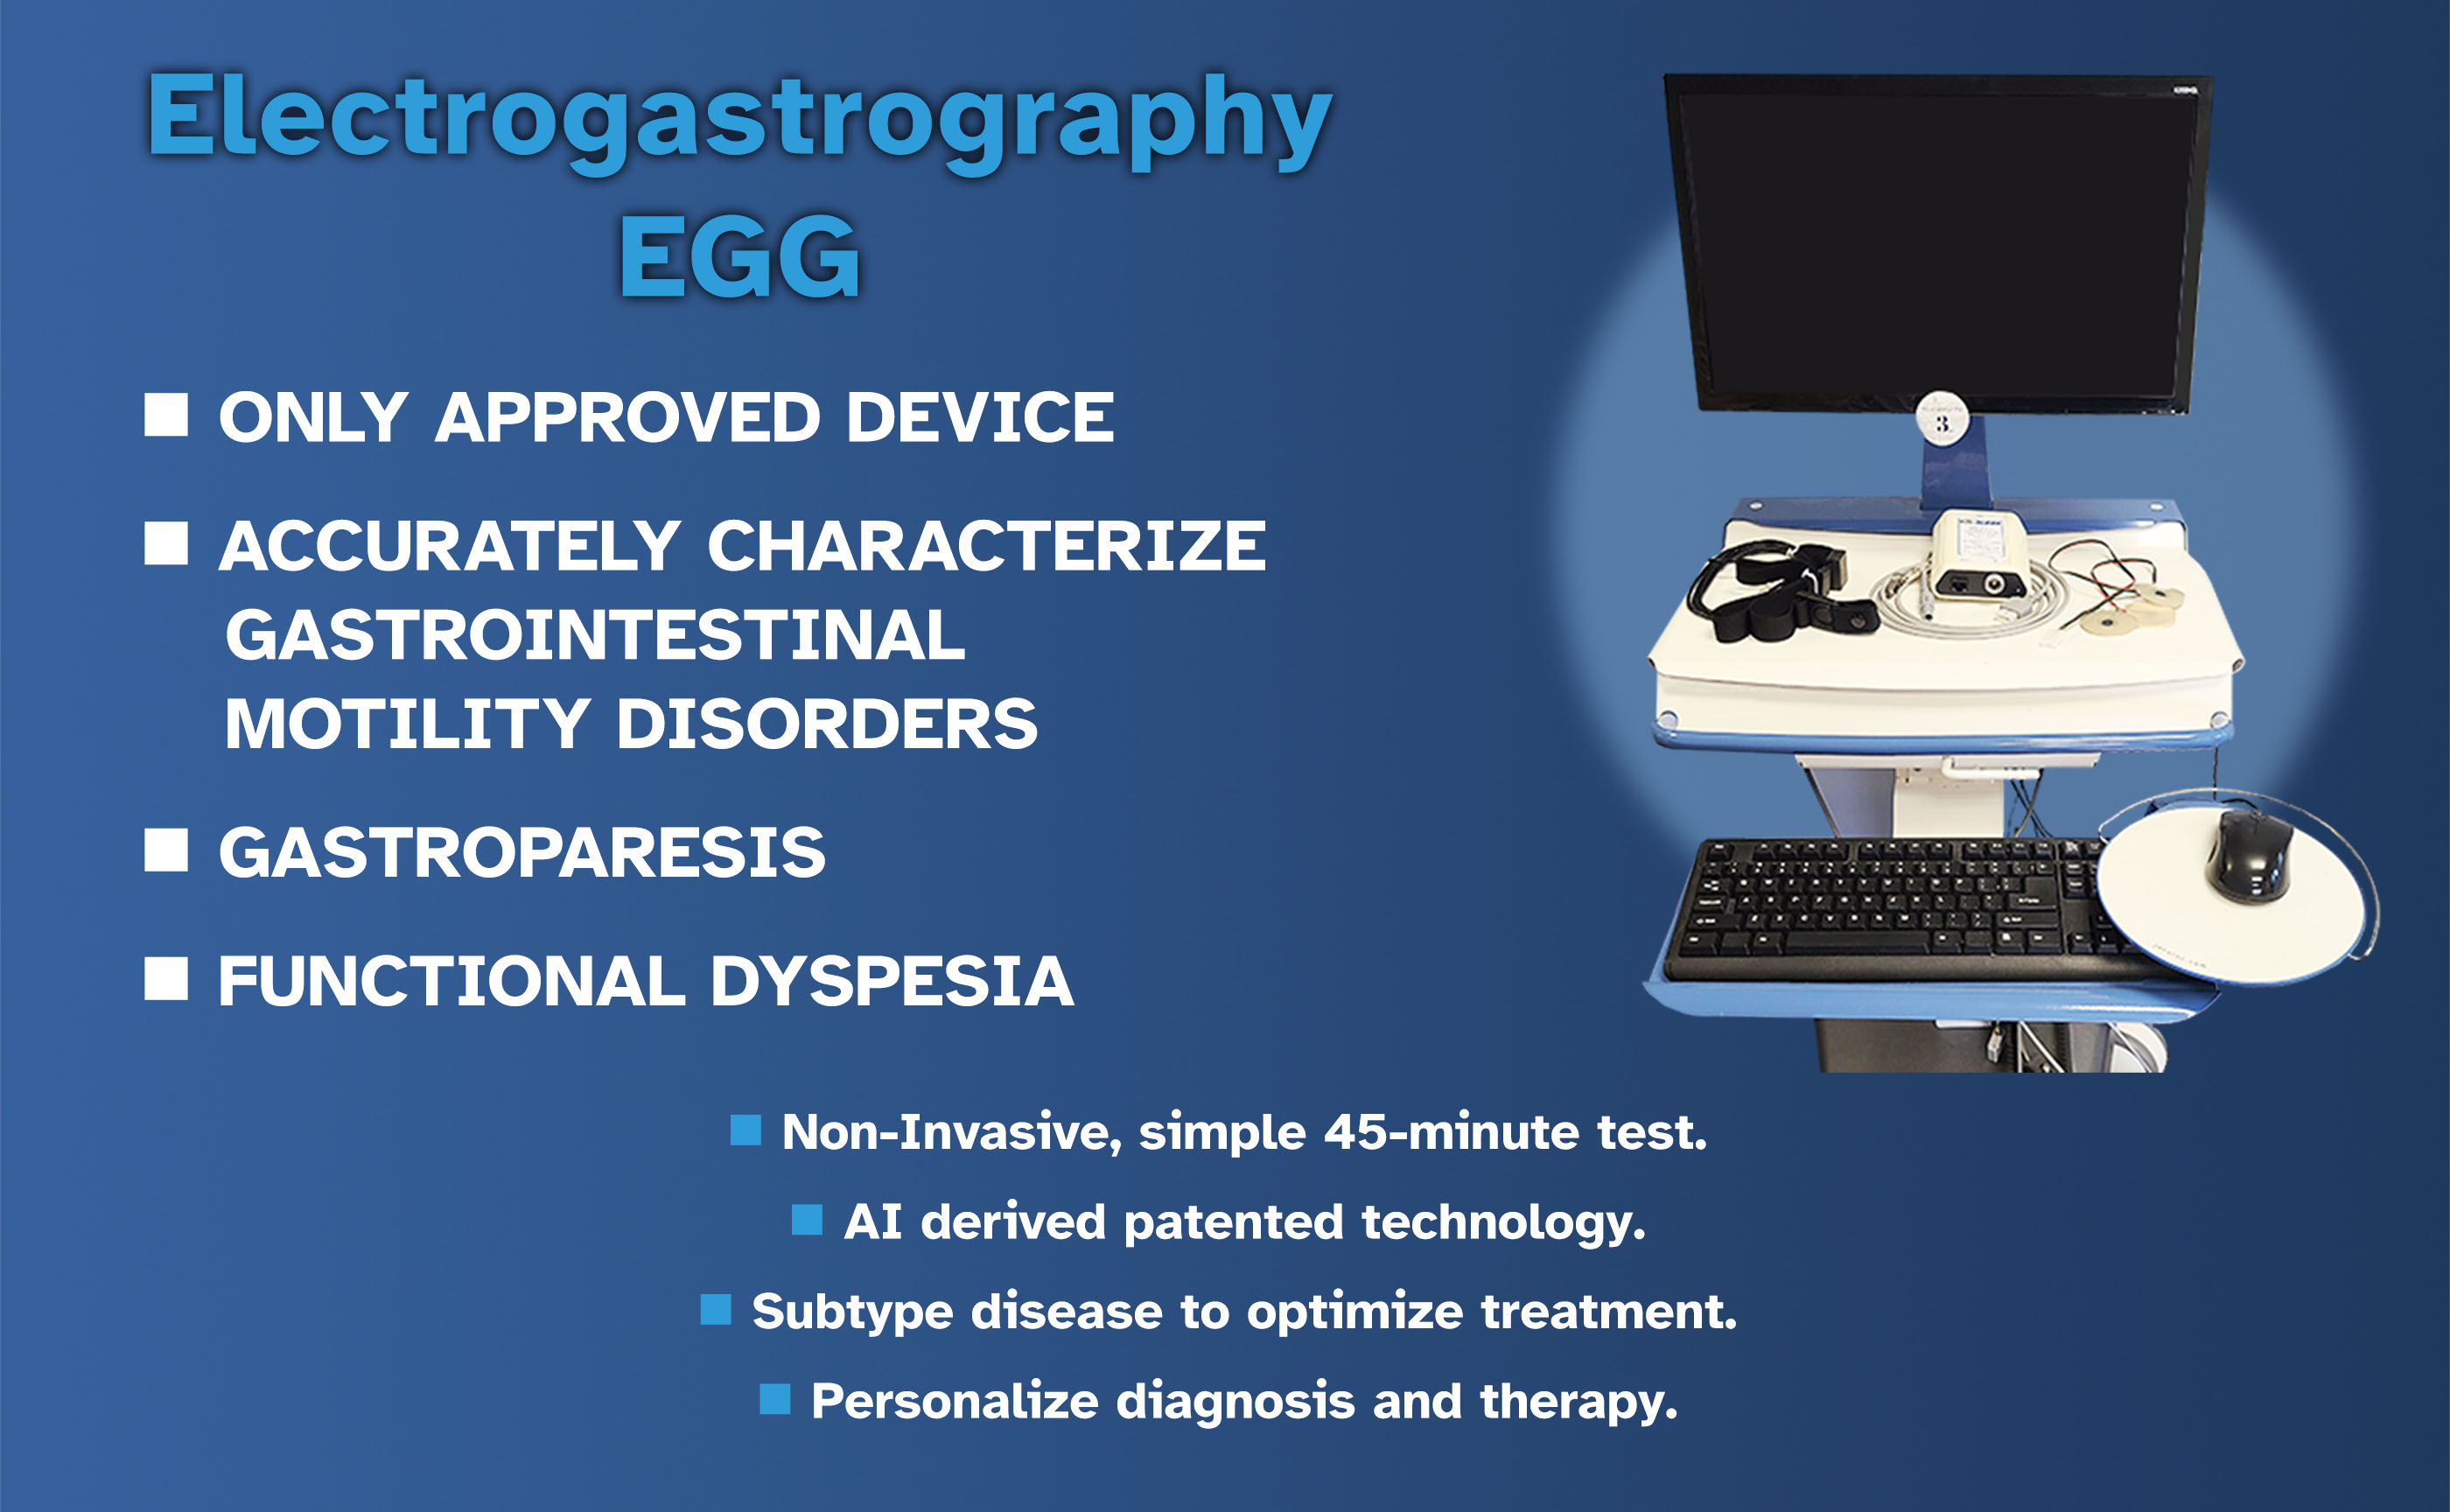 Electrogastrography EGG / ONLY APPROVED DEVICE / ACCURATELY CHARACTERIZE GASTROINTESTINAL MOTILITY DISORDERS / GASTROPARESIS / FUNCTIONAL DYSPESIA / ONLY NON-INVASIVE DIAGNOSTIC TEST FOR ENDOMETRIOSIS / 100% SENSITIVITY / 100% SELECTIVITY || Non-Invasive, simple 45-minute test.  / AI derived patented technology. / Subtype disease to optimize treatment. / Personalize diagnosis and therapy.